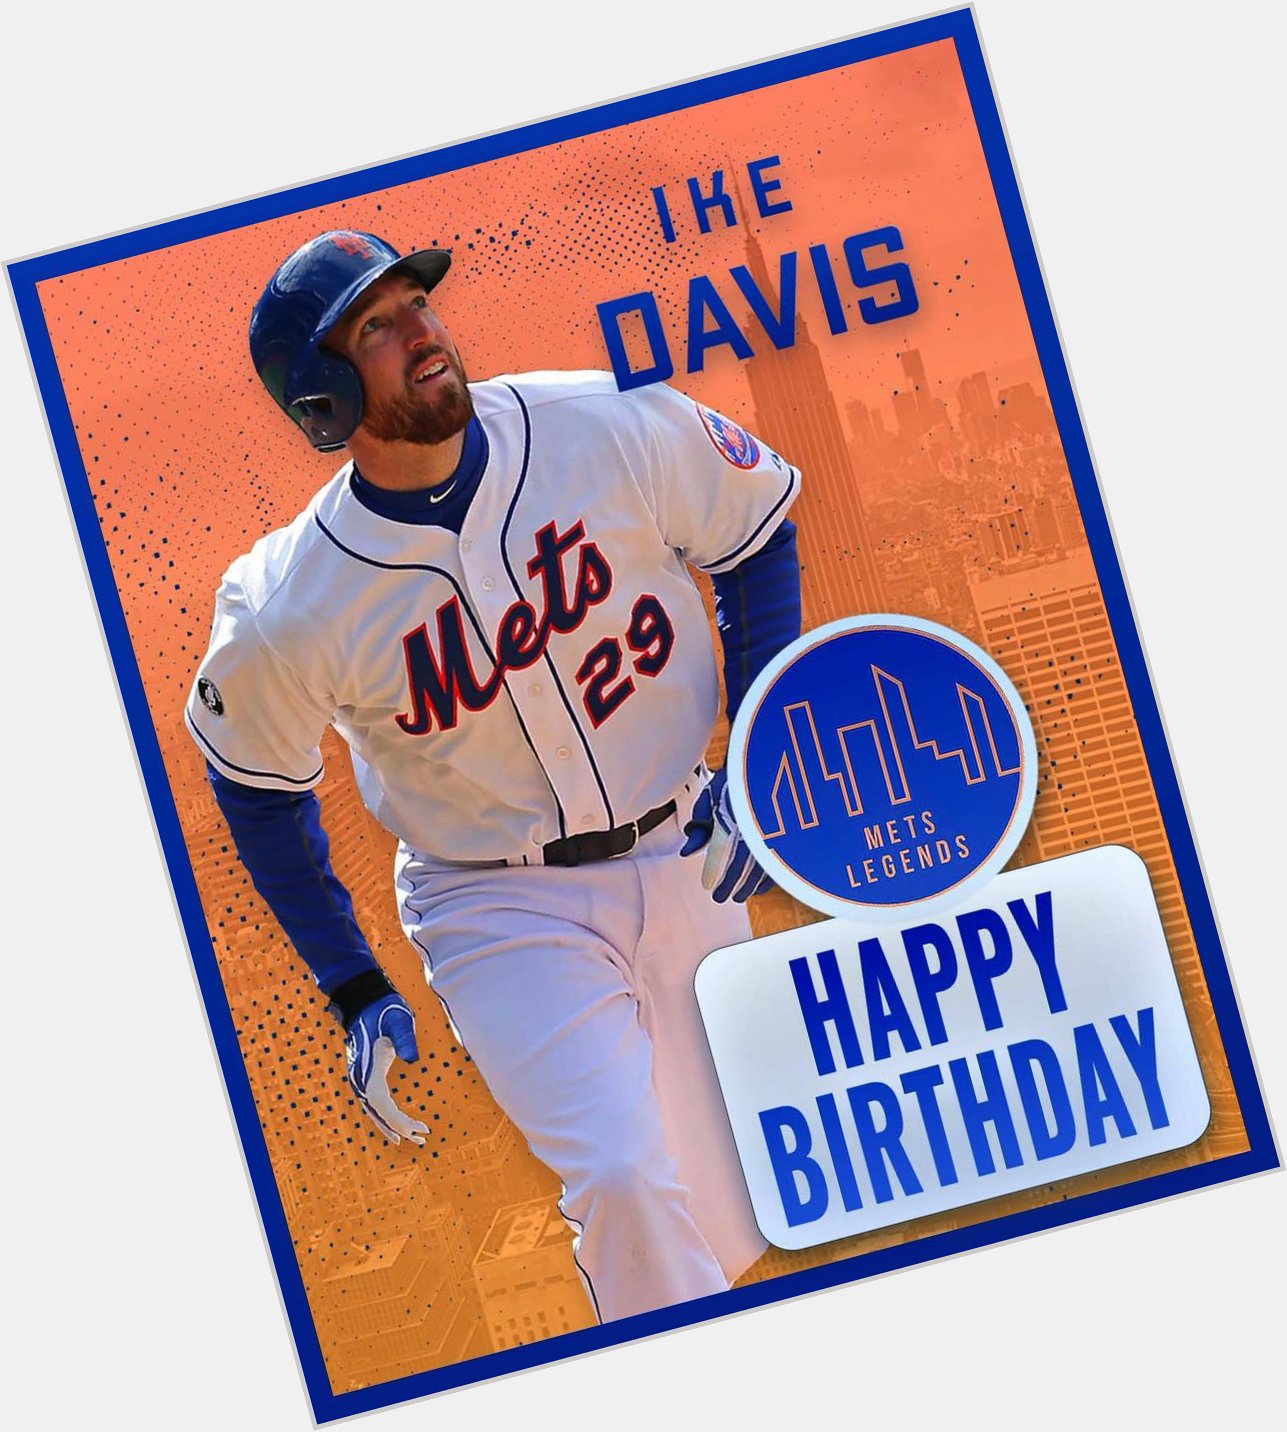 Happy Birthday, Ike Davis! The former first baseman turns 35-years-old today.   